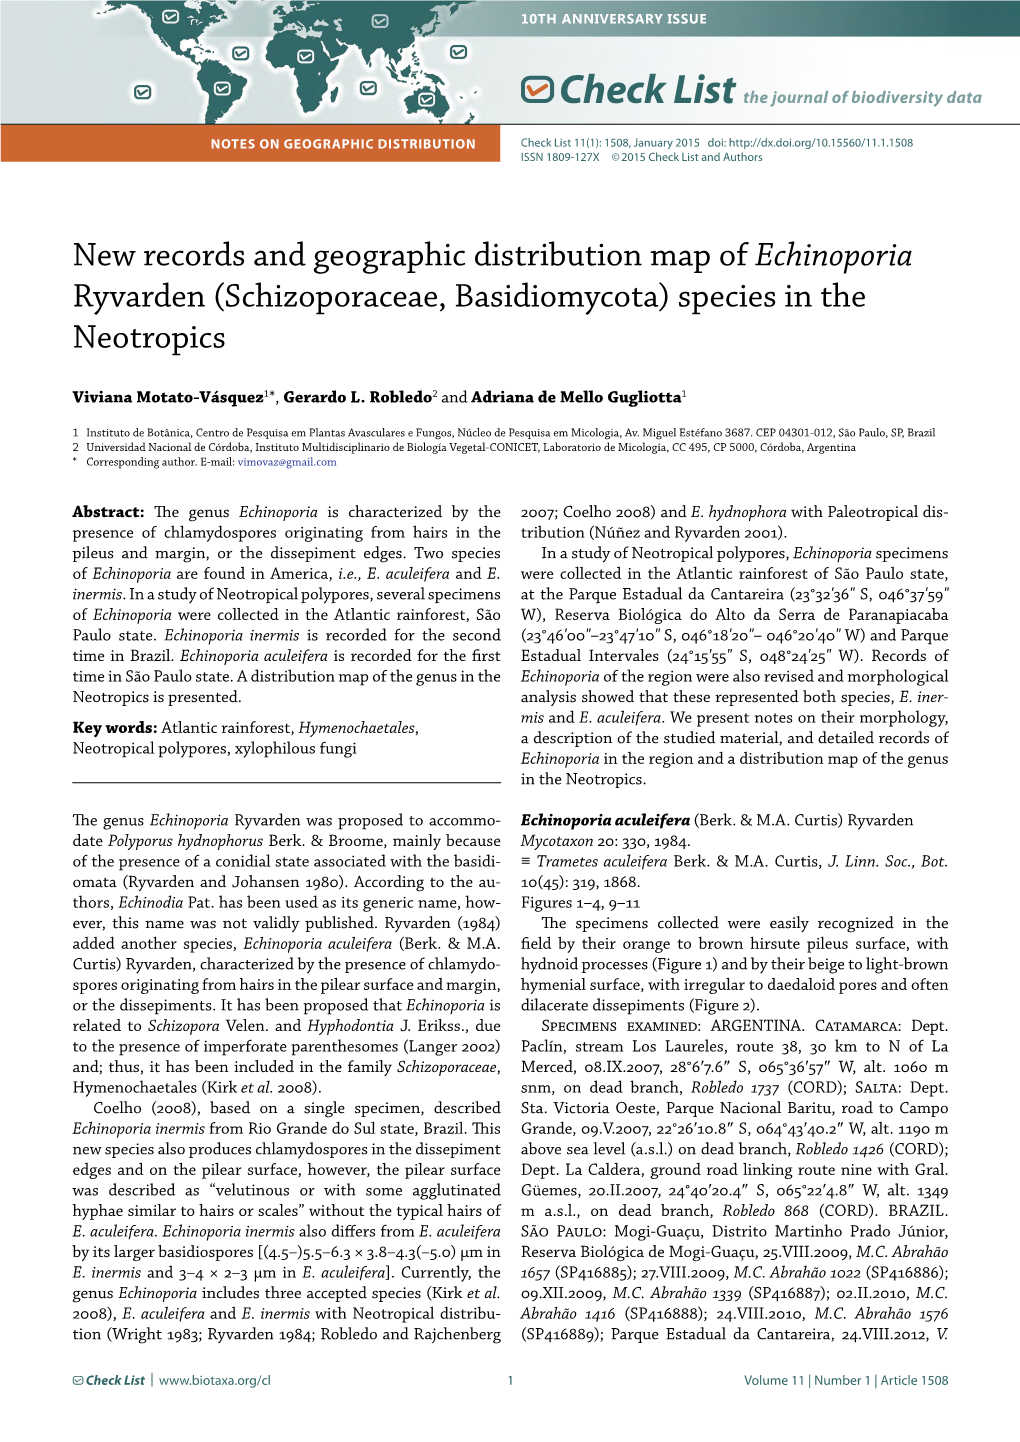 New Records and Geographic Distribution Map of Echinoporia Ryvarden (Schizoporaceae, Basidiomycota) Species in the Neotropics